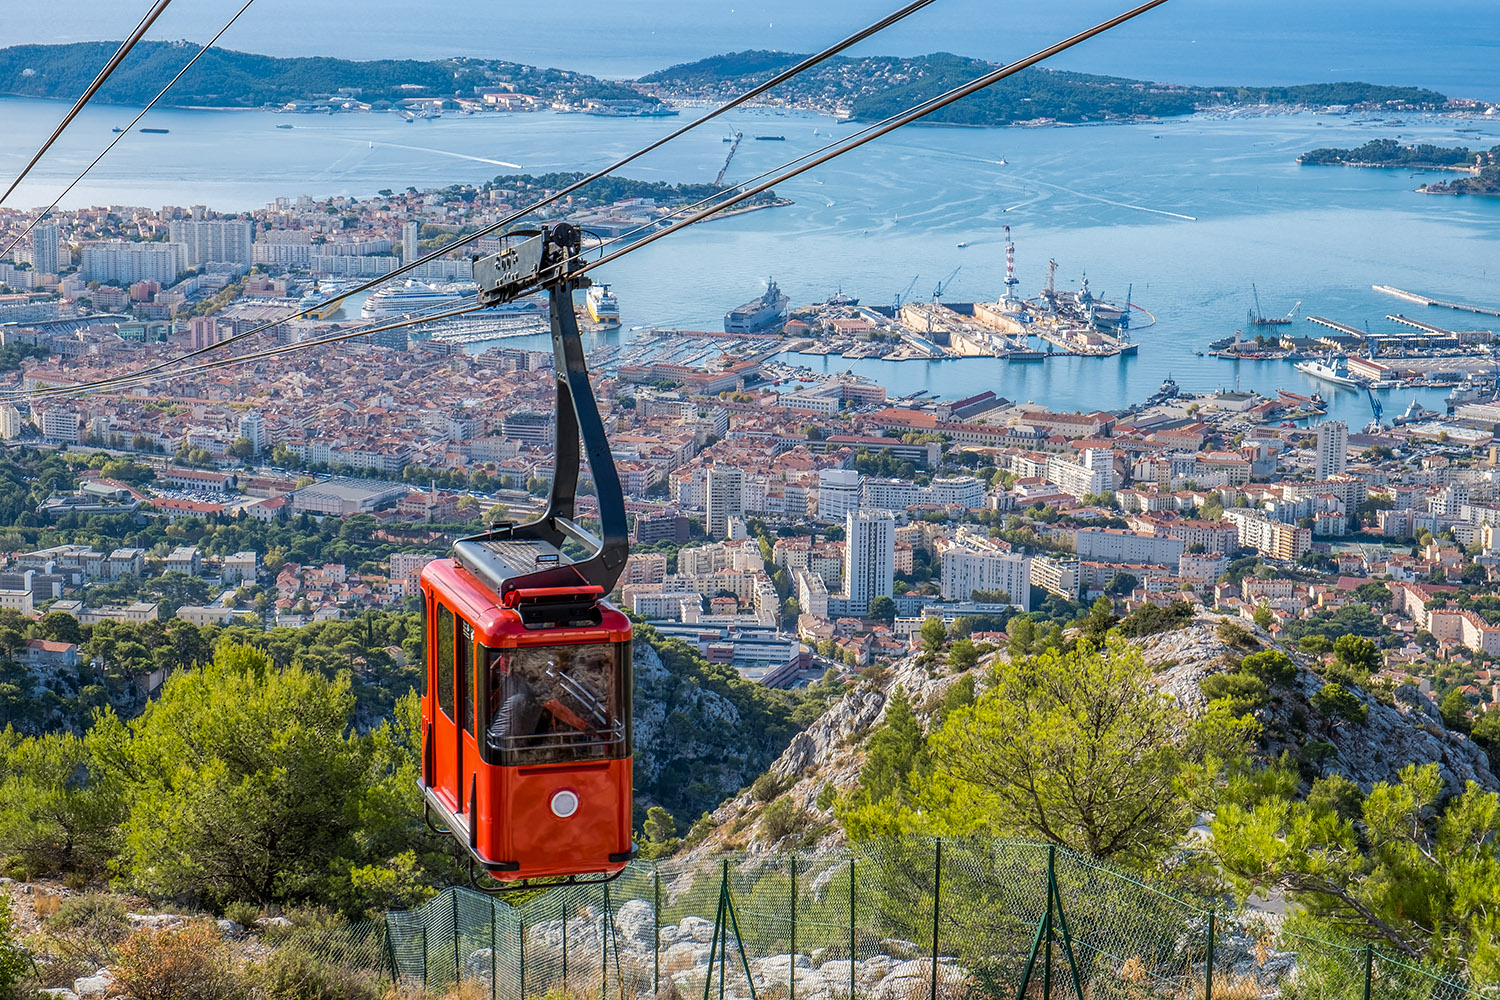 From the top, one has a spectacular view over the town and its military port